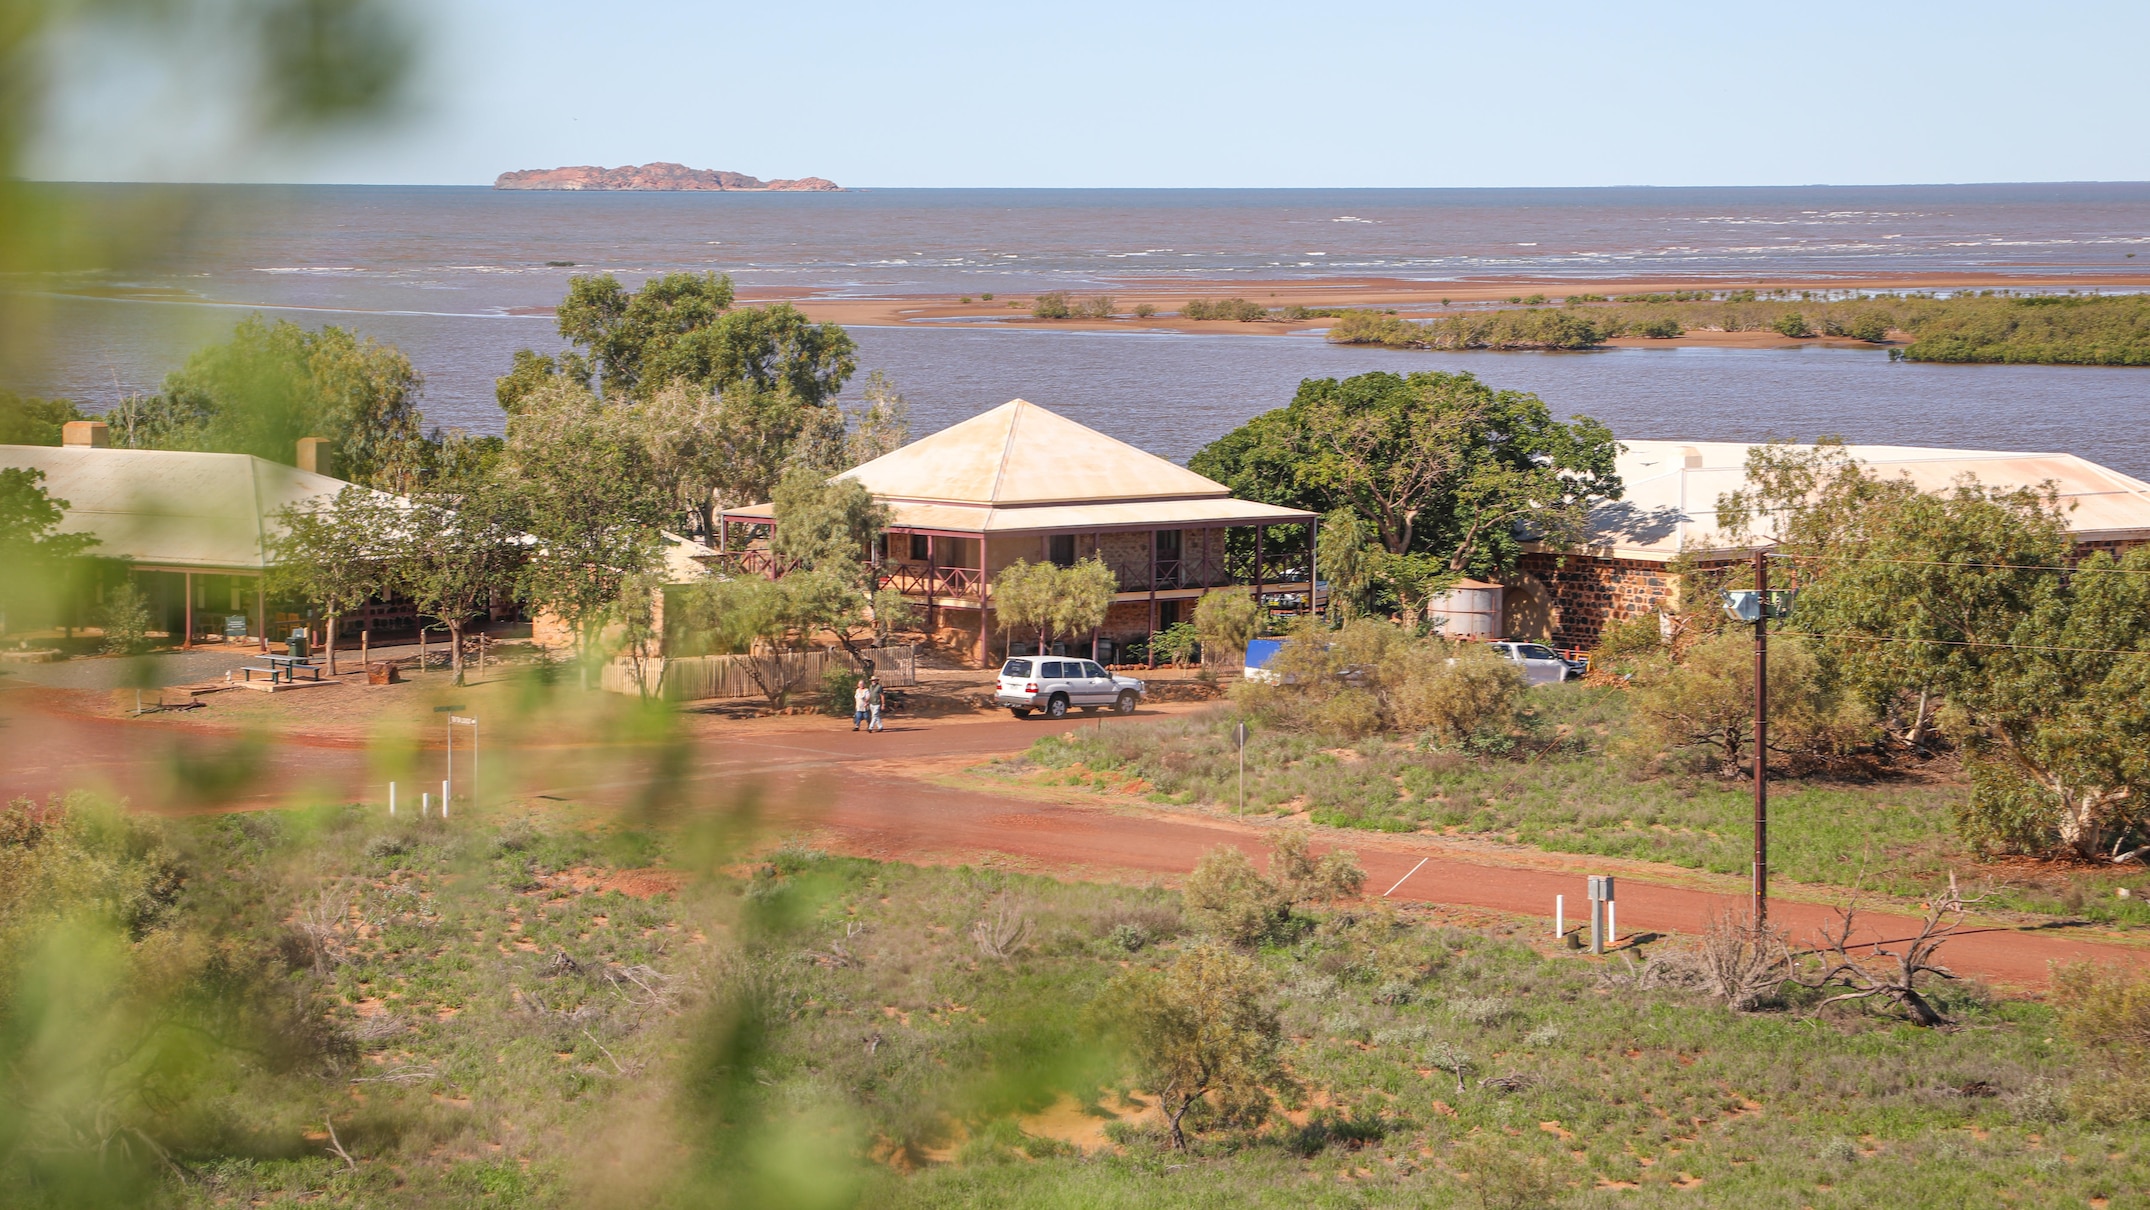 tourist facilities in historic pilbara town of cossack closed as dispute with wa government deepens